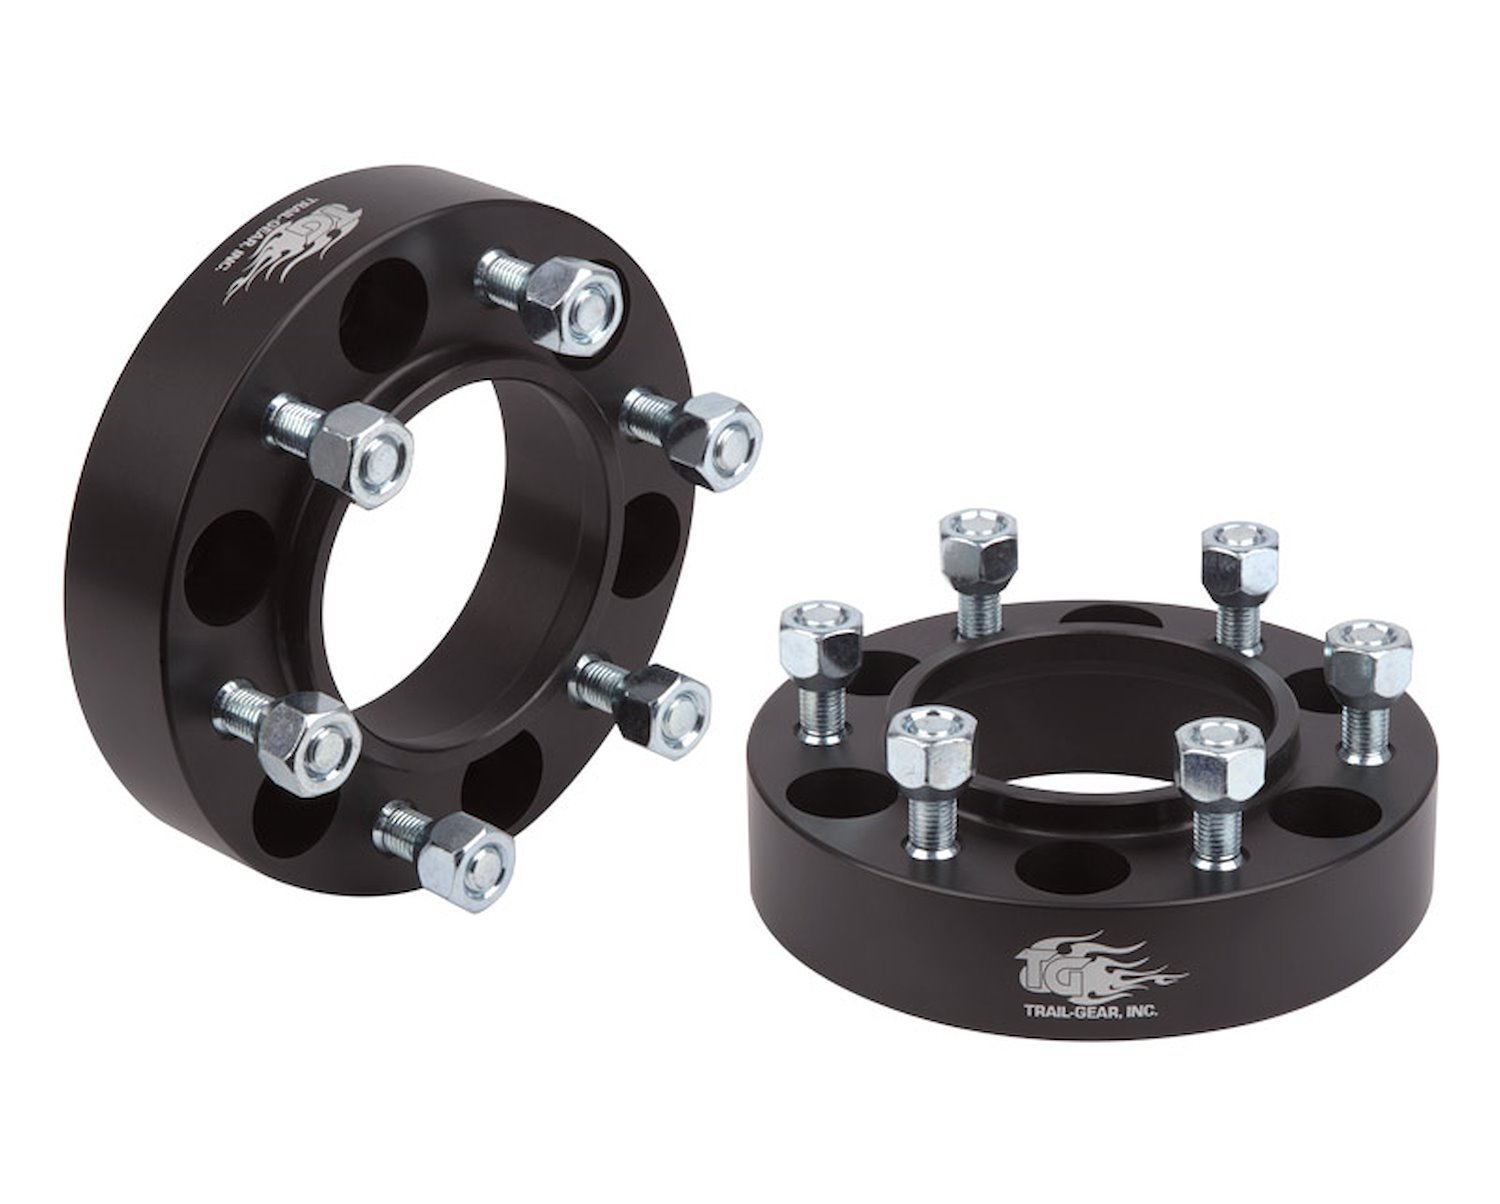 Hub-Centric Wheel Spacer Kit 1.25" Thickness